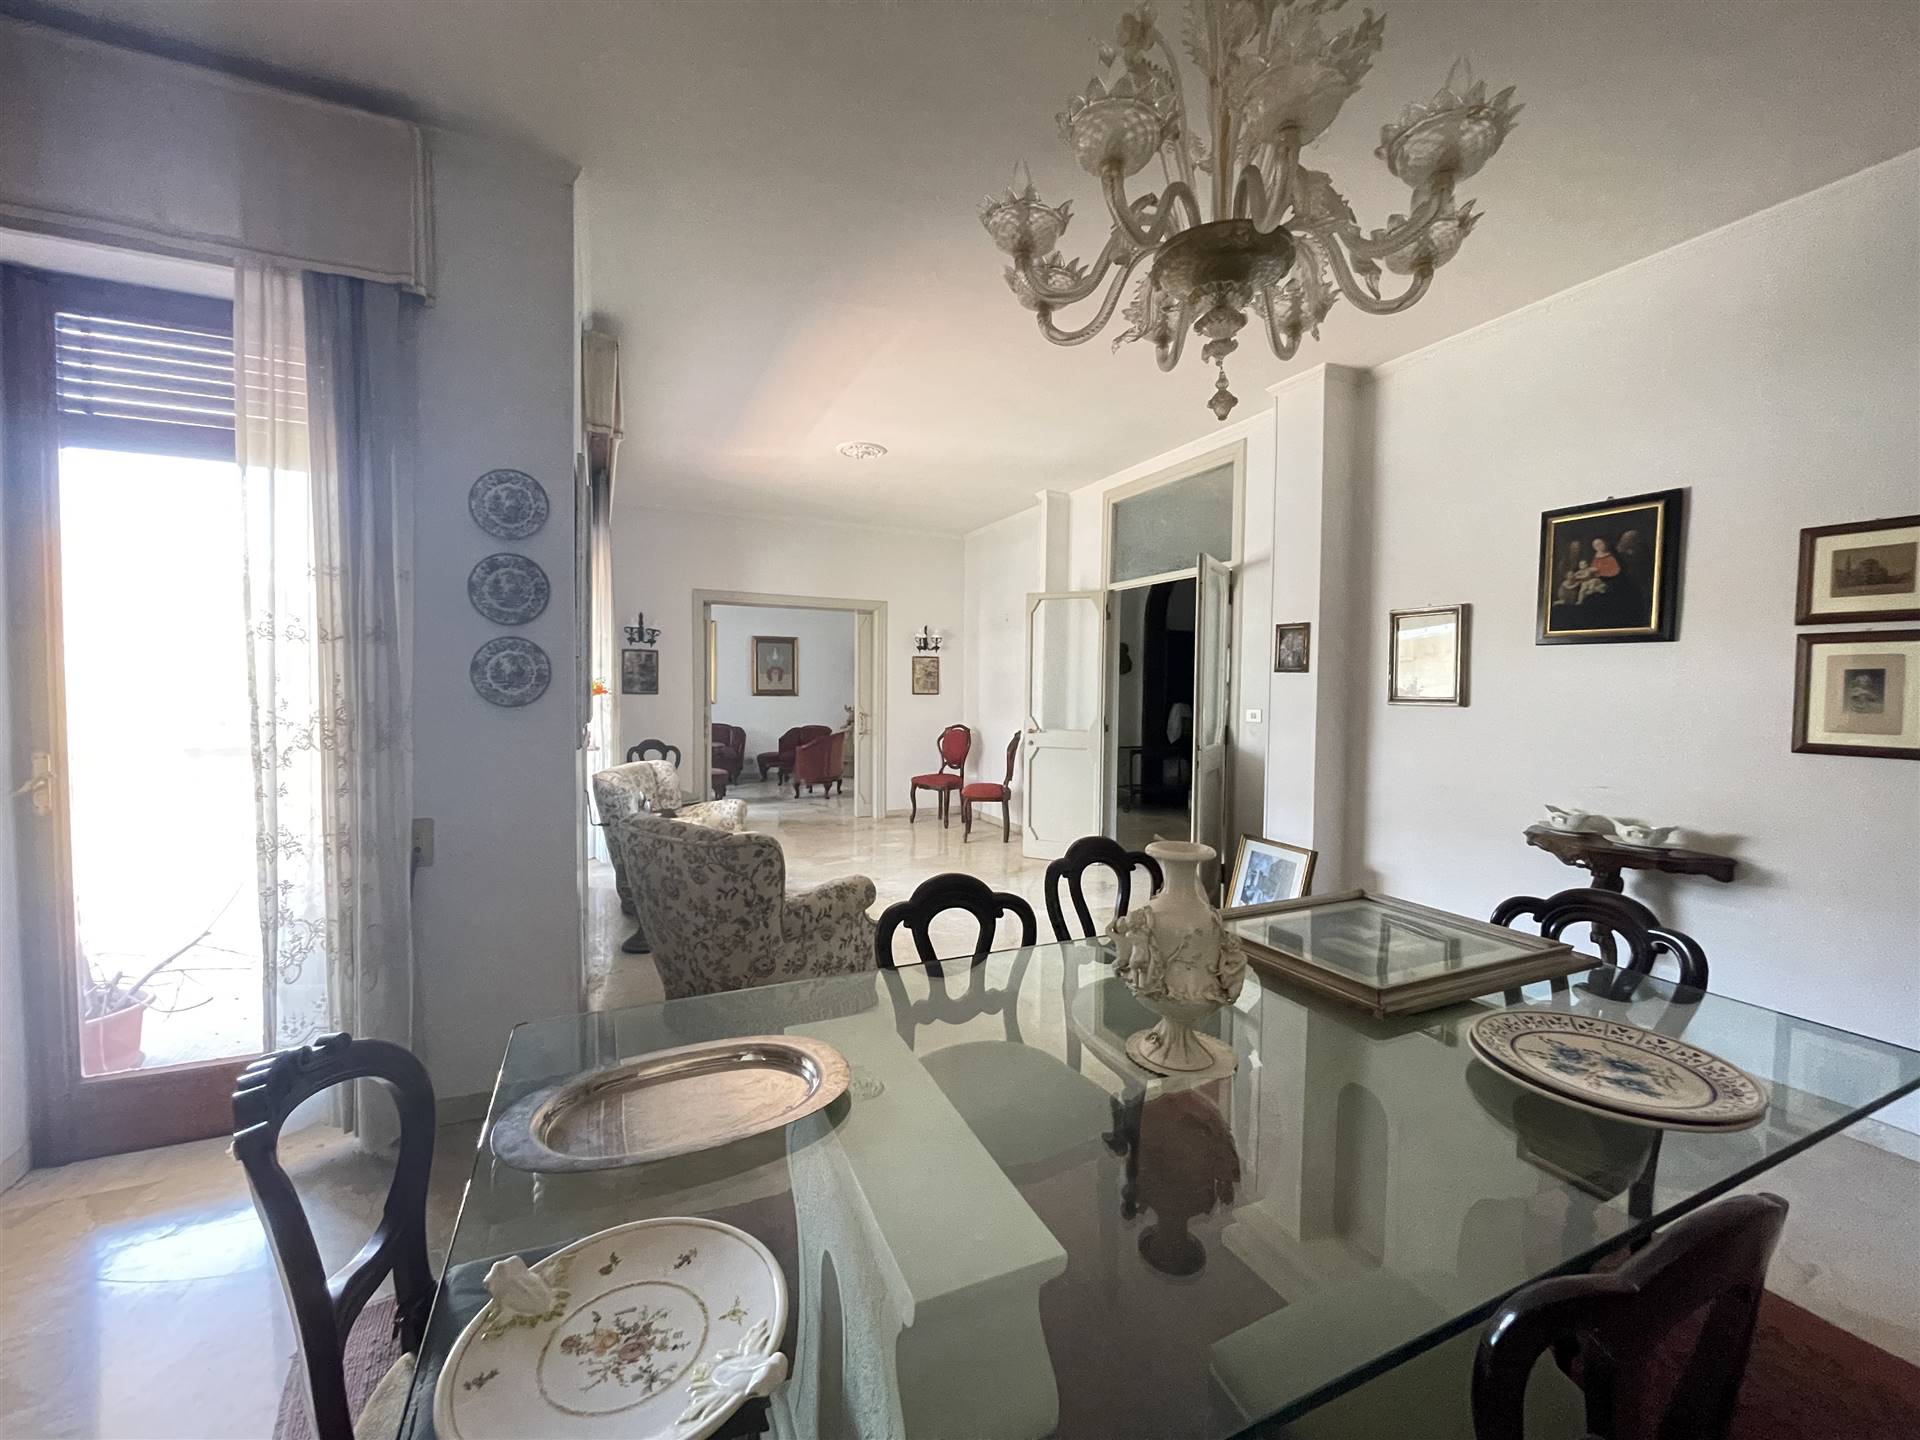 MAZZINI, LECCE, Apartment for sale of 260 Sq. mt., Good condition, Heating Individual heating system, Energetic class: G, Epi: 171,91 kwh/m2 year, 